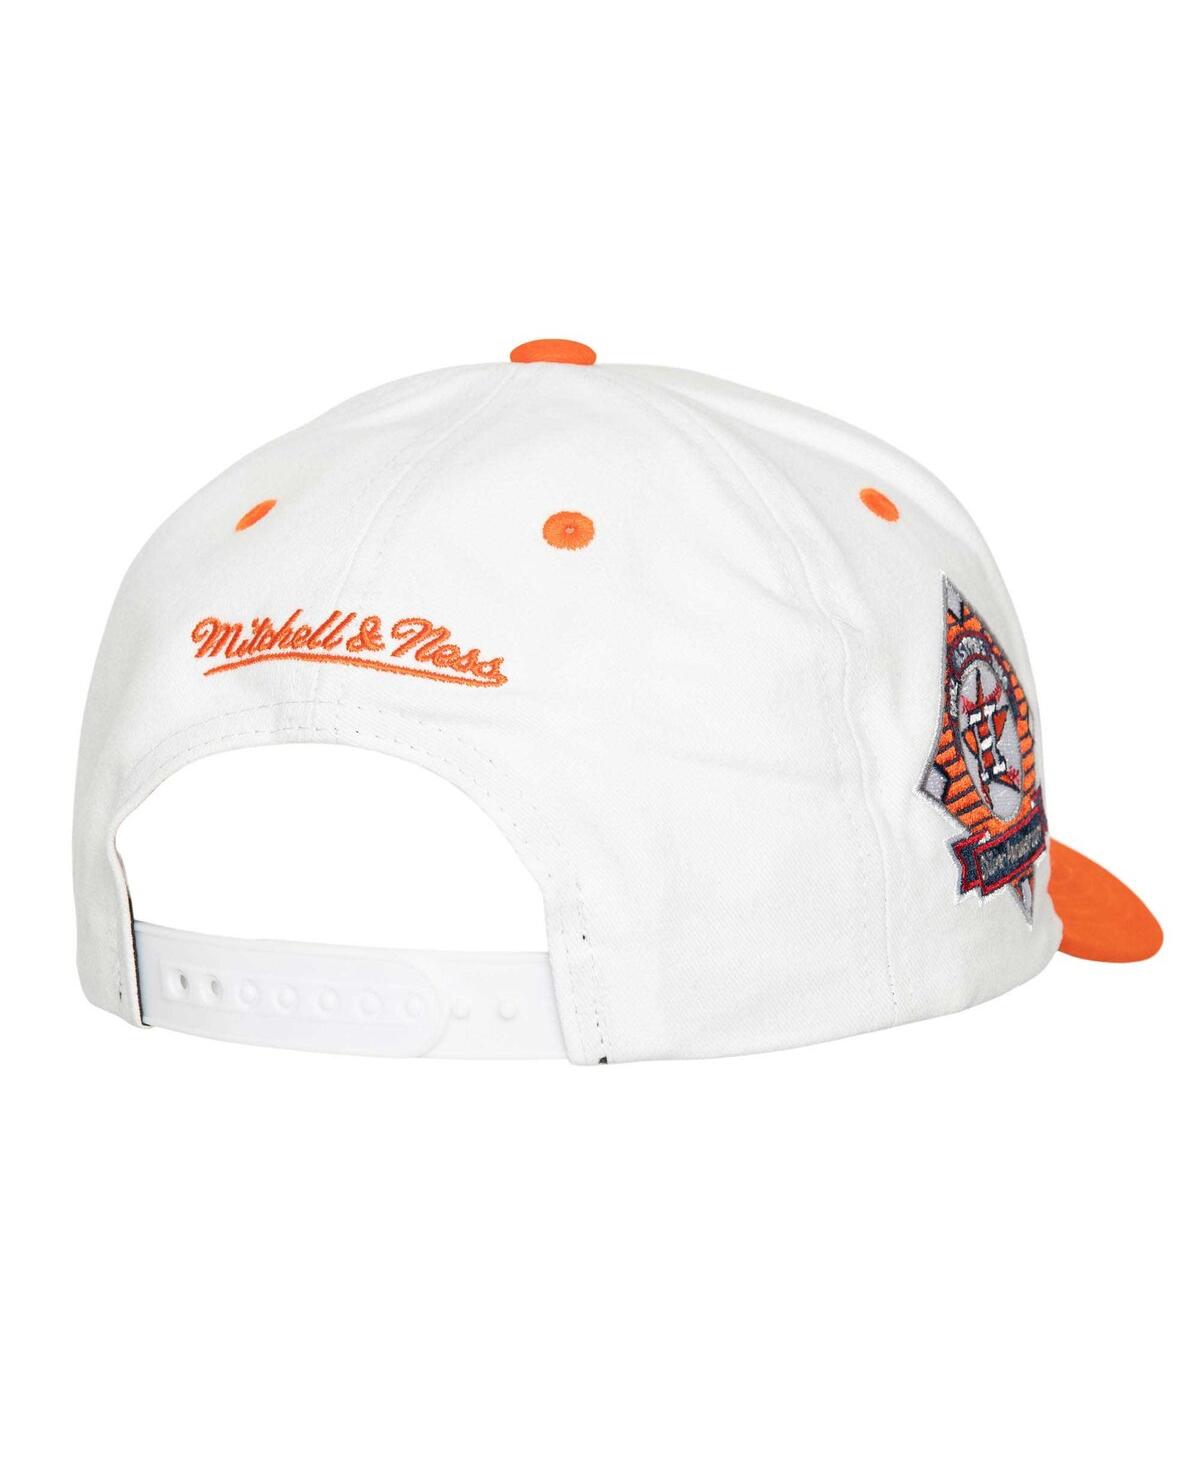 Shop Mitchell & Ness Mitchell Ness Men's White Houston Astros Cooperstown Collection Tail Sweep Pro Snapback Hat